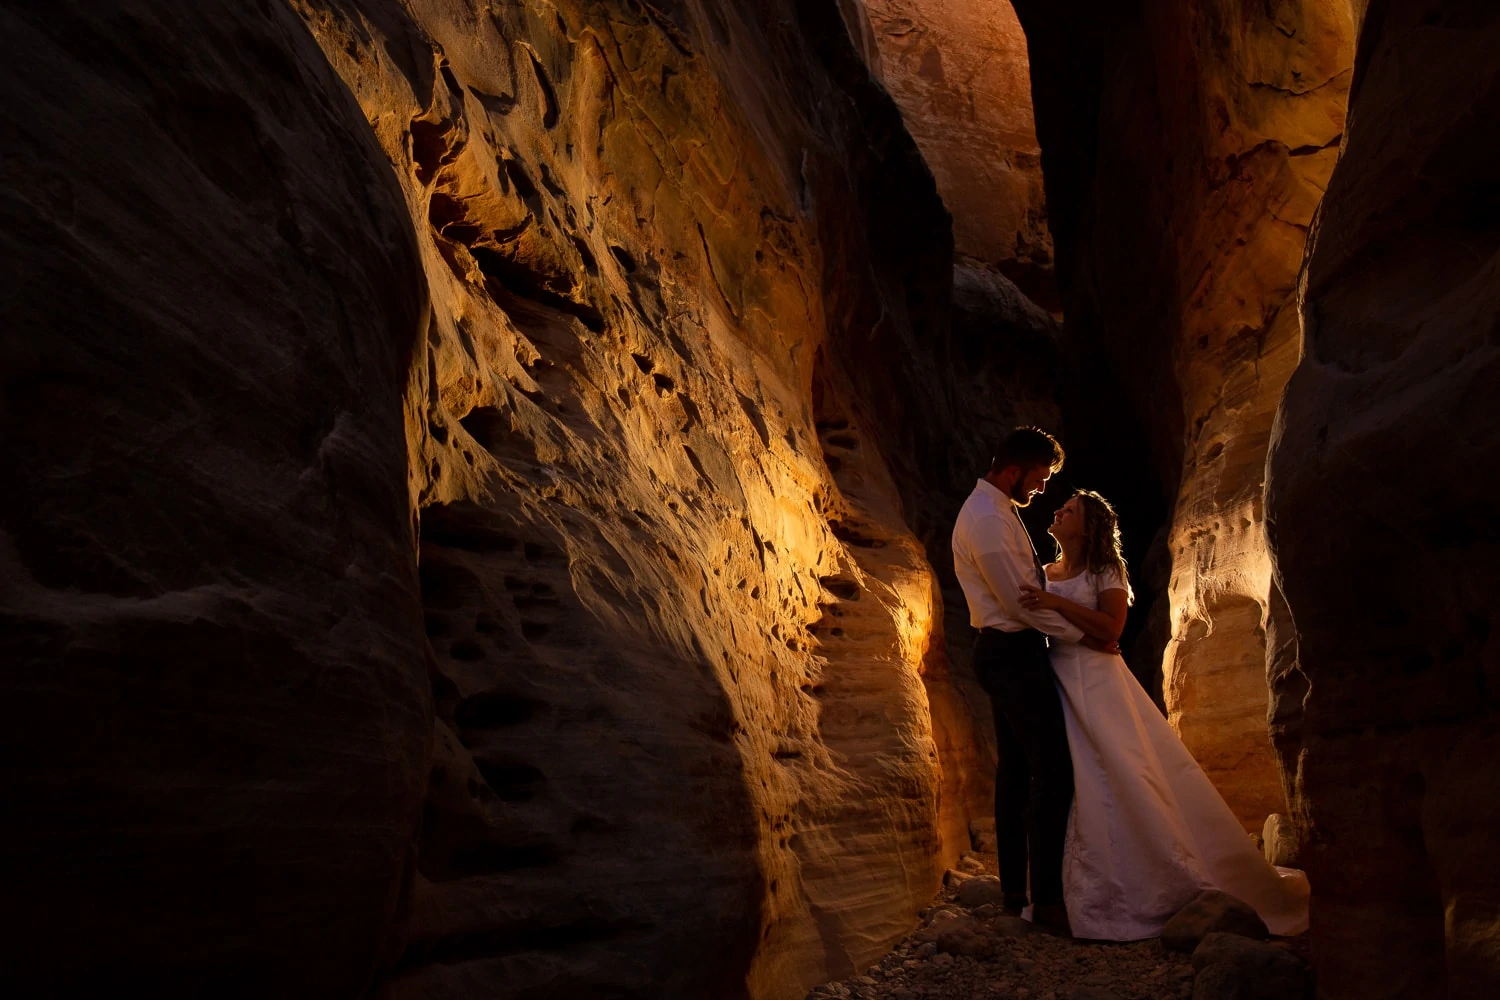 An adventurous wedding couple is photographed in a slot canyon.